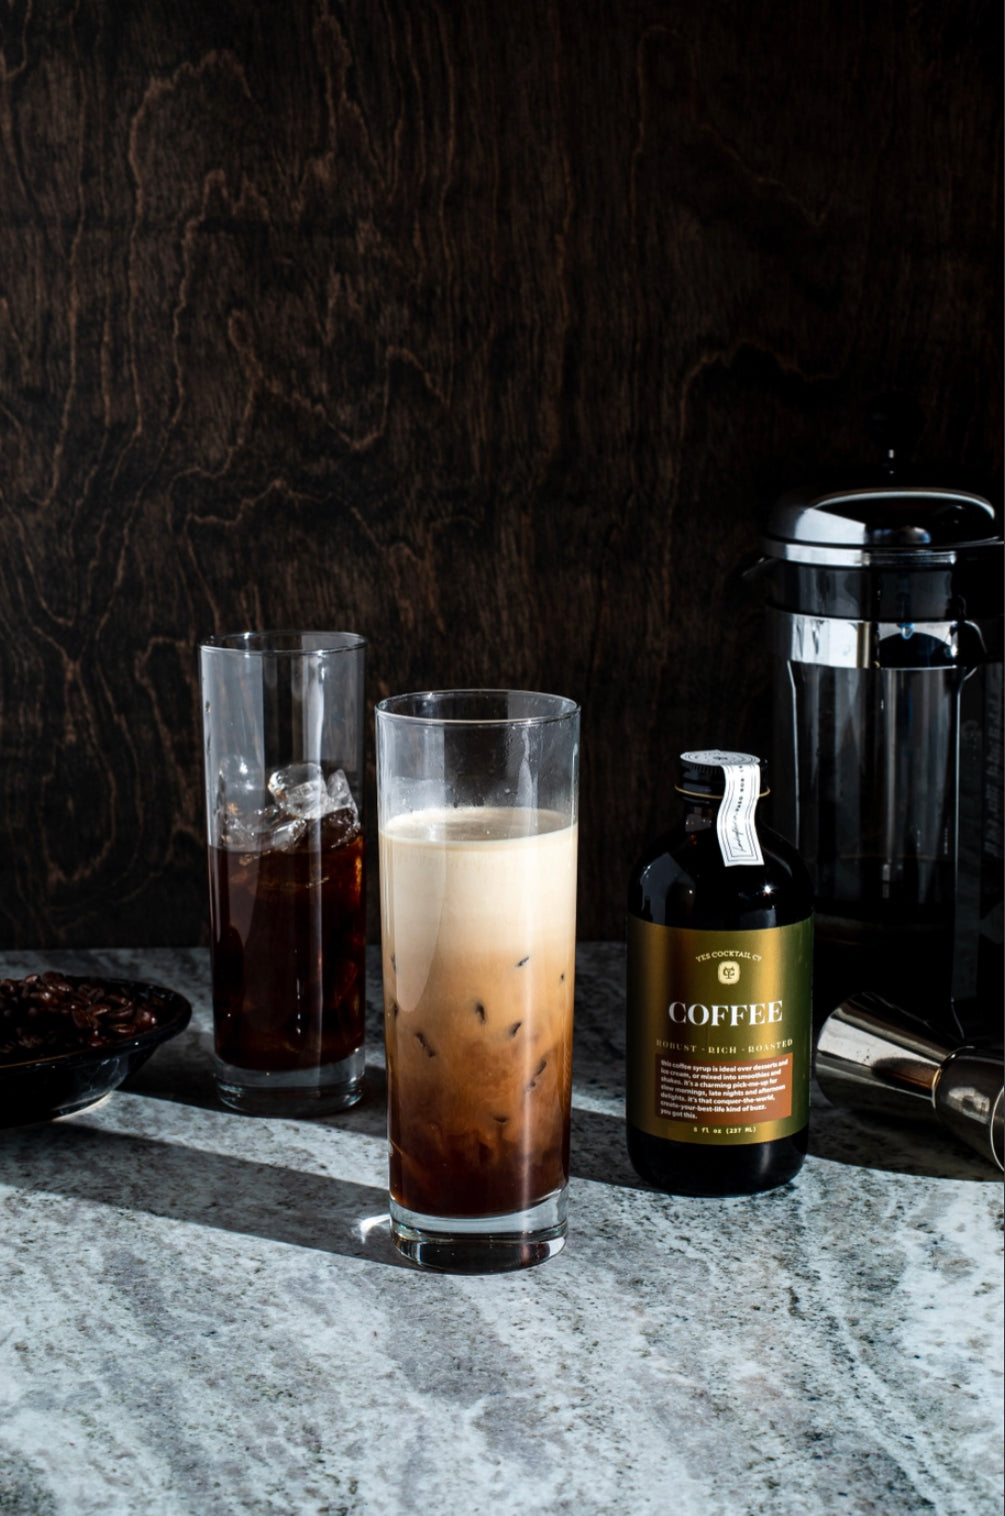 Cold Brew Coffee Syrup